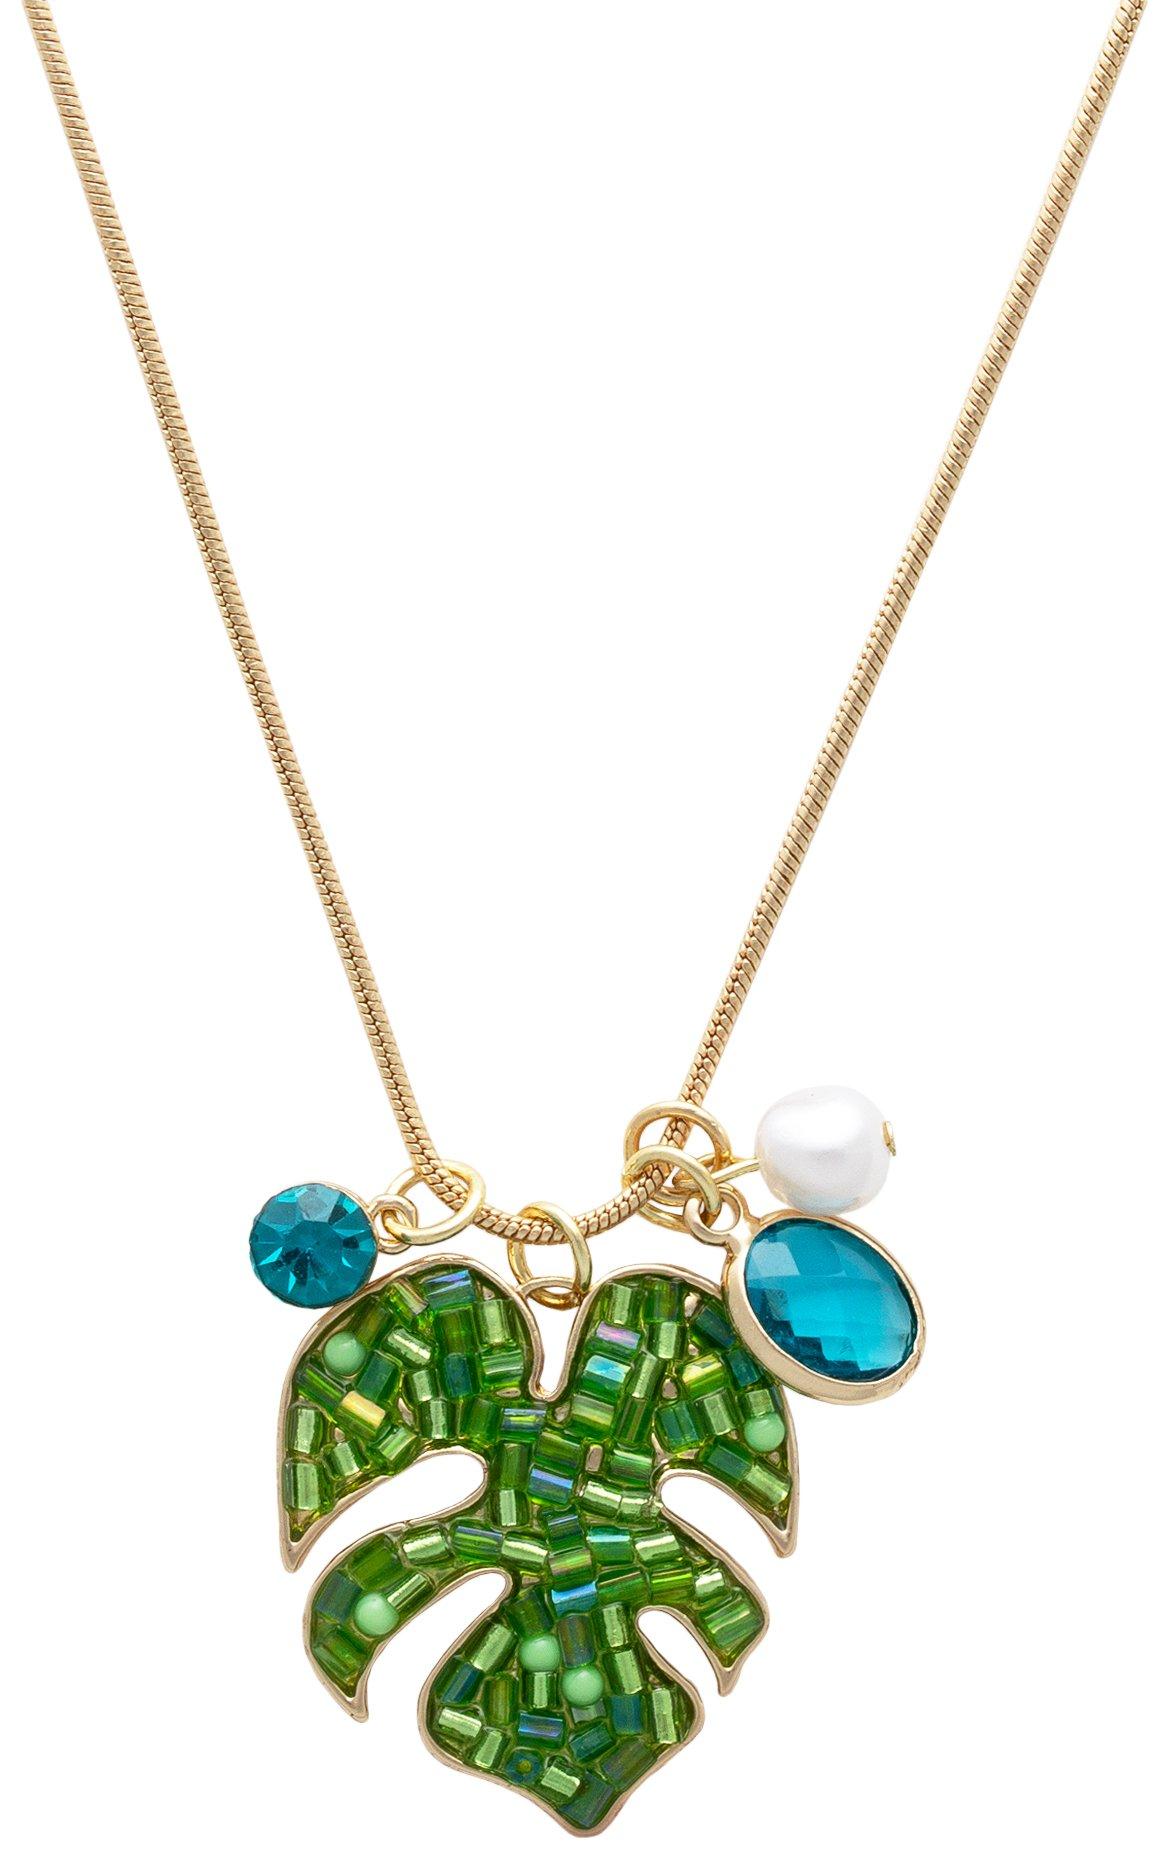 20 In. Beaded Monstera Leaf Gold Tone Necklace